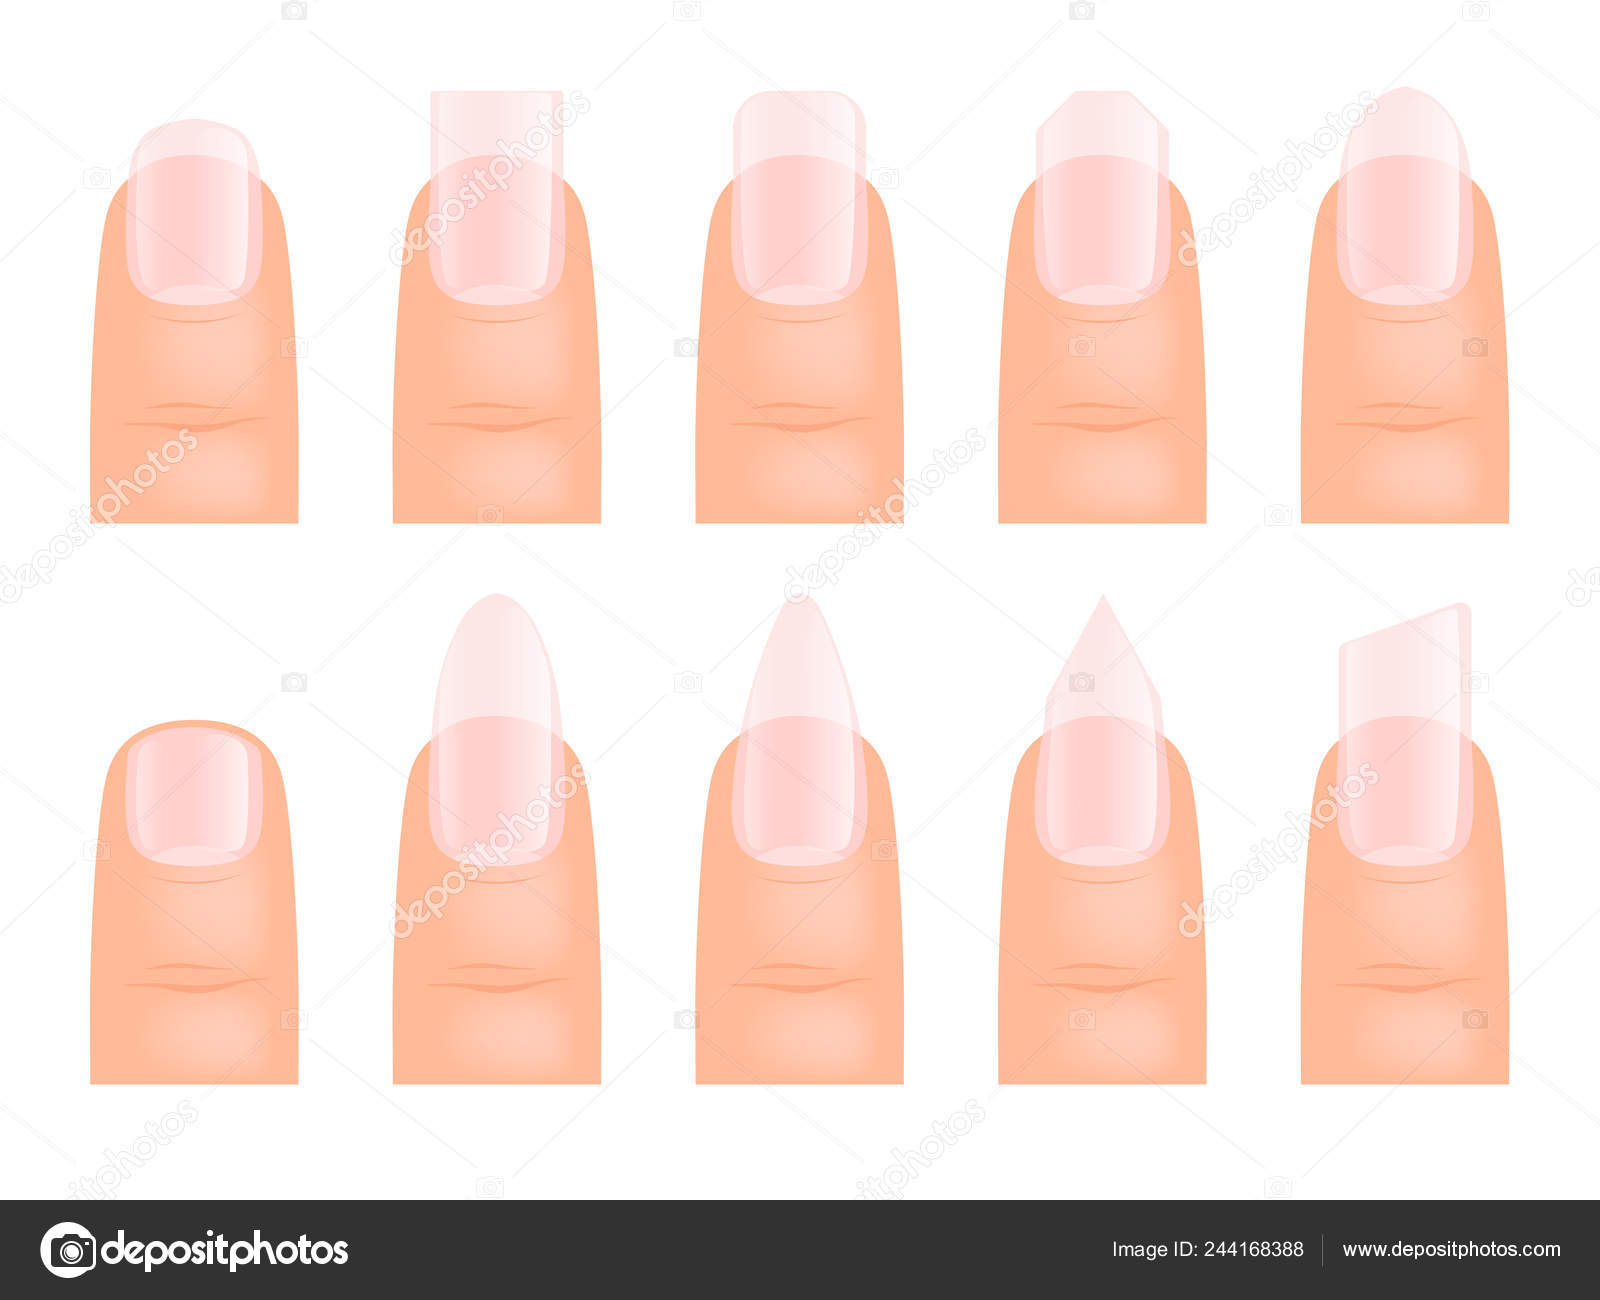 Download Manicure Nails Various Type Of Fingernail Art Vector Cartoon Template Vector Image By C Onyxprj Vector Stock 244168388